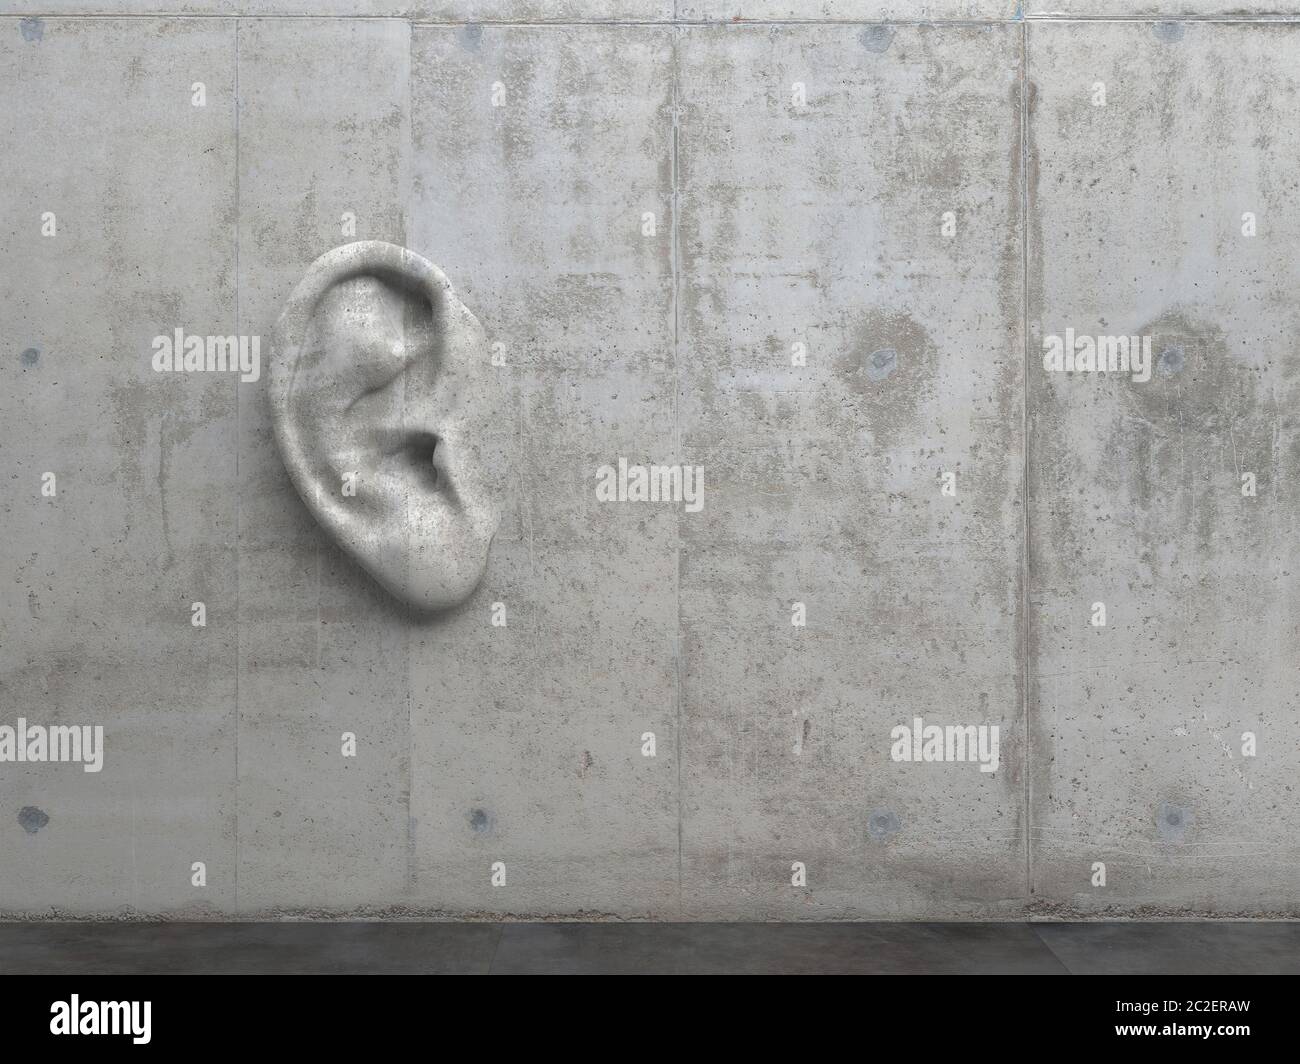 Cement sculpture in the shape of a human ear on a concrete wall. Illustration of the metaphor 'Even walls have ears.' Creative conceptual modern art w Stock Photo